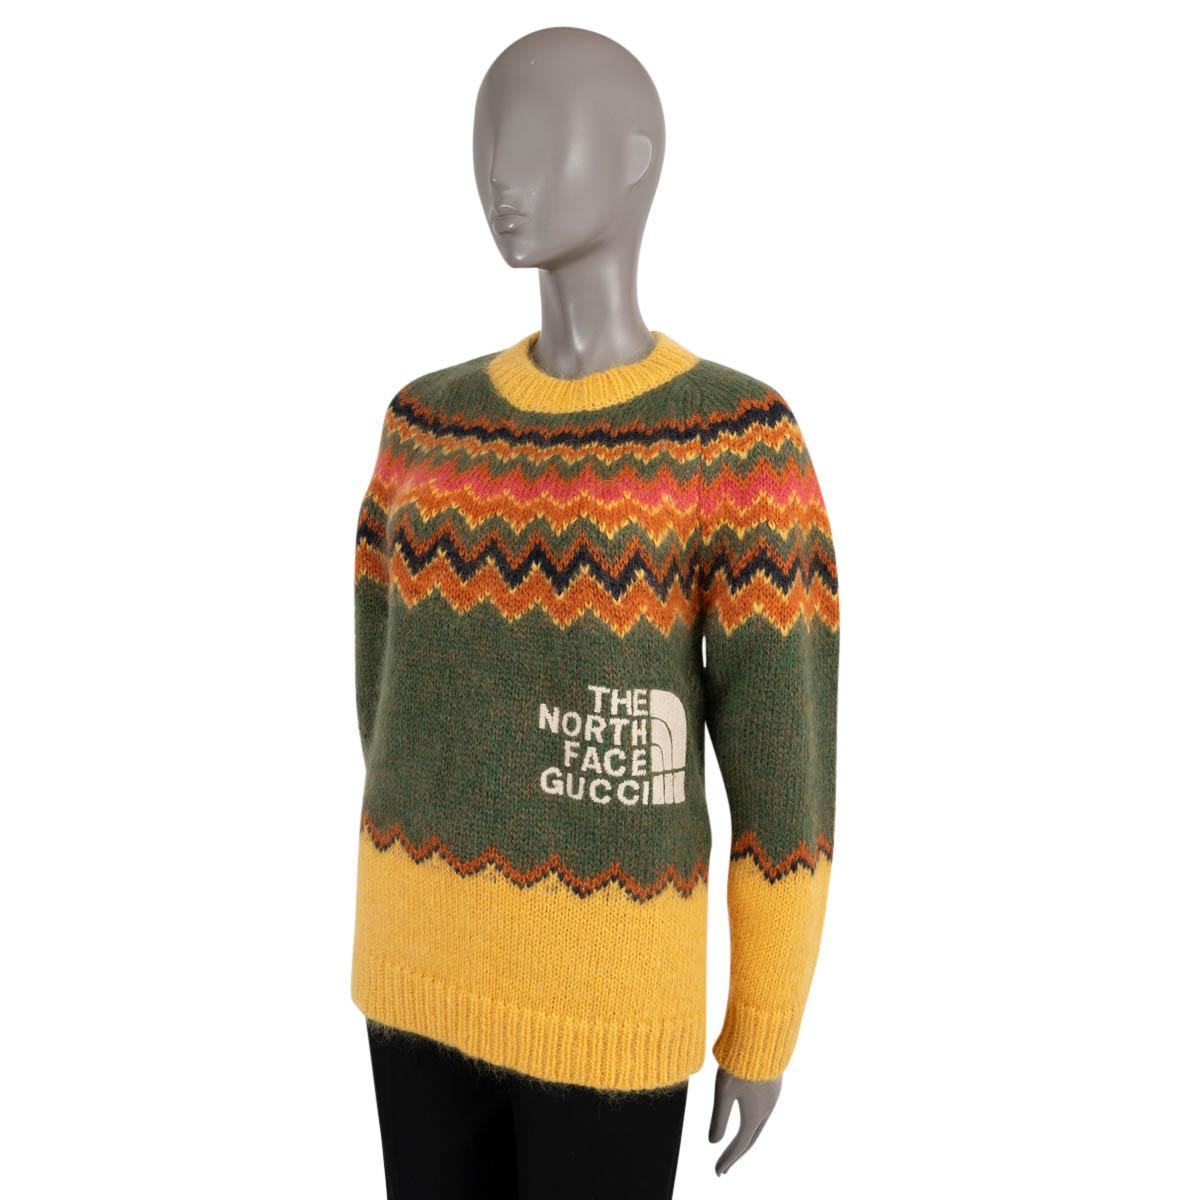 100% authentic Gucci x The North Face Faire Isle sweater in mohair (67%), polyamide (28%) and wool (5%) yellow, green, orange and navy. Features an embroidered logo on the front and rib-knit hem and cuffs. New with tag.

2022 Spring Capsule